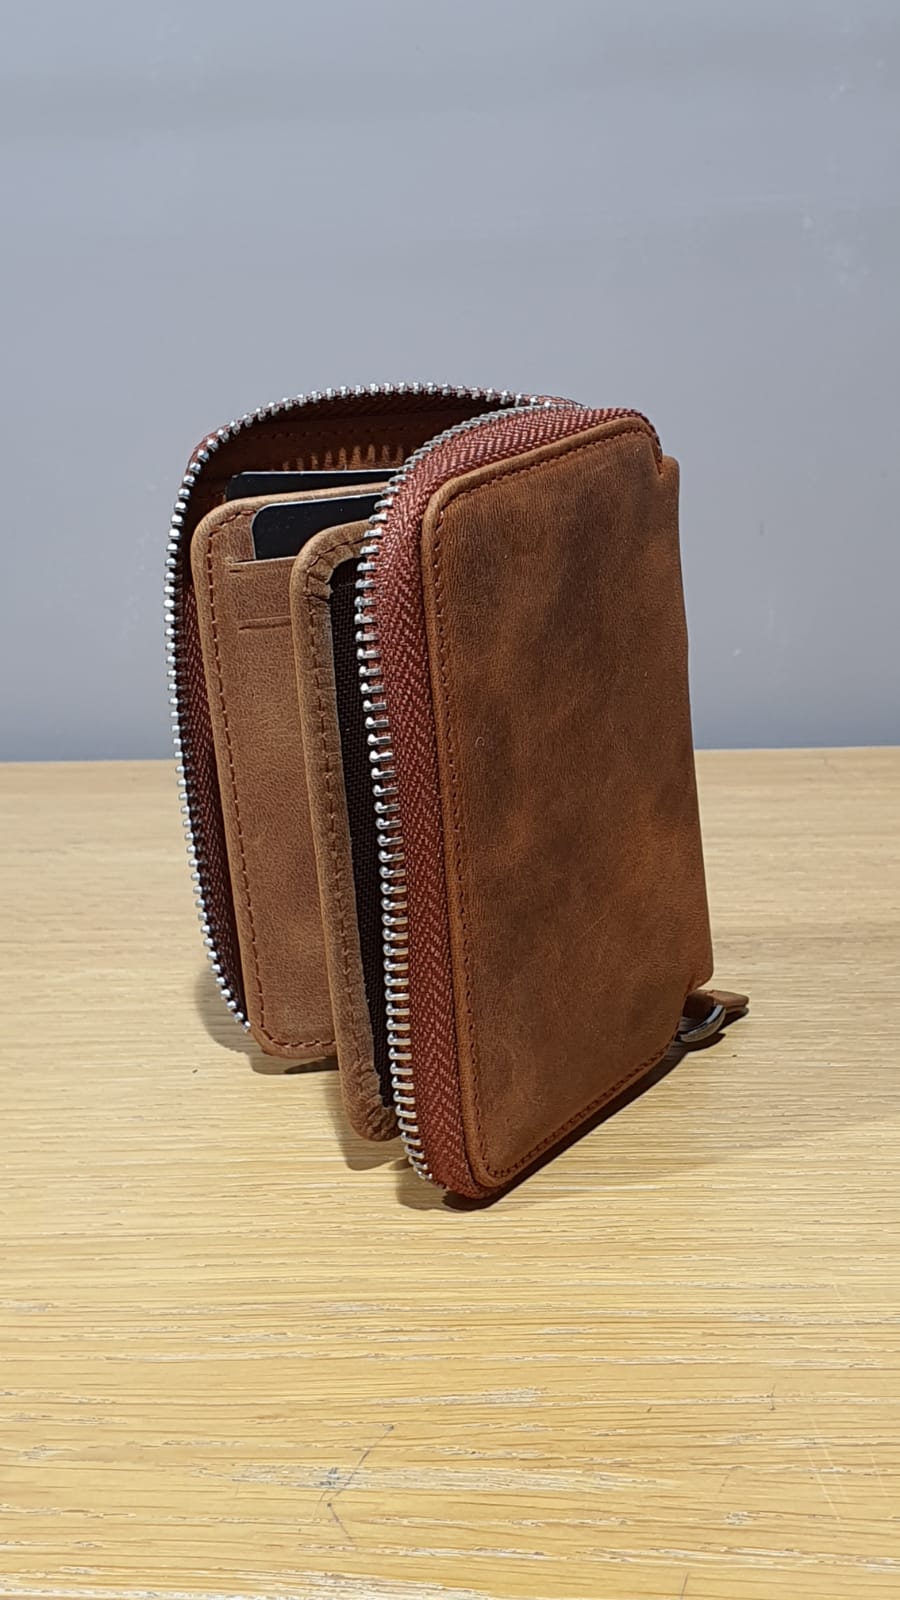 Leather Zip Coin Wallets, Free Shipping